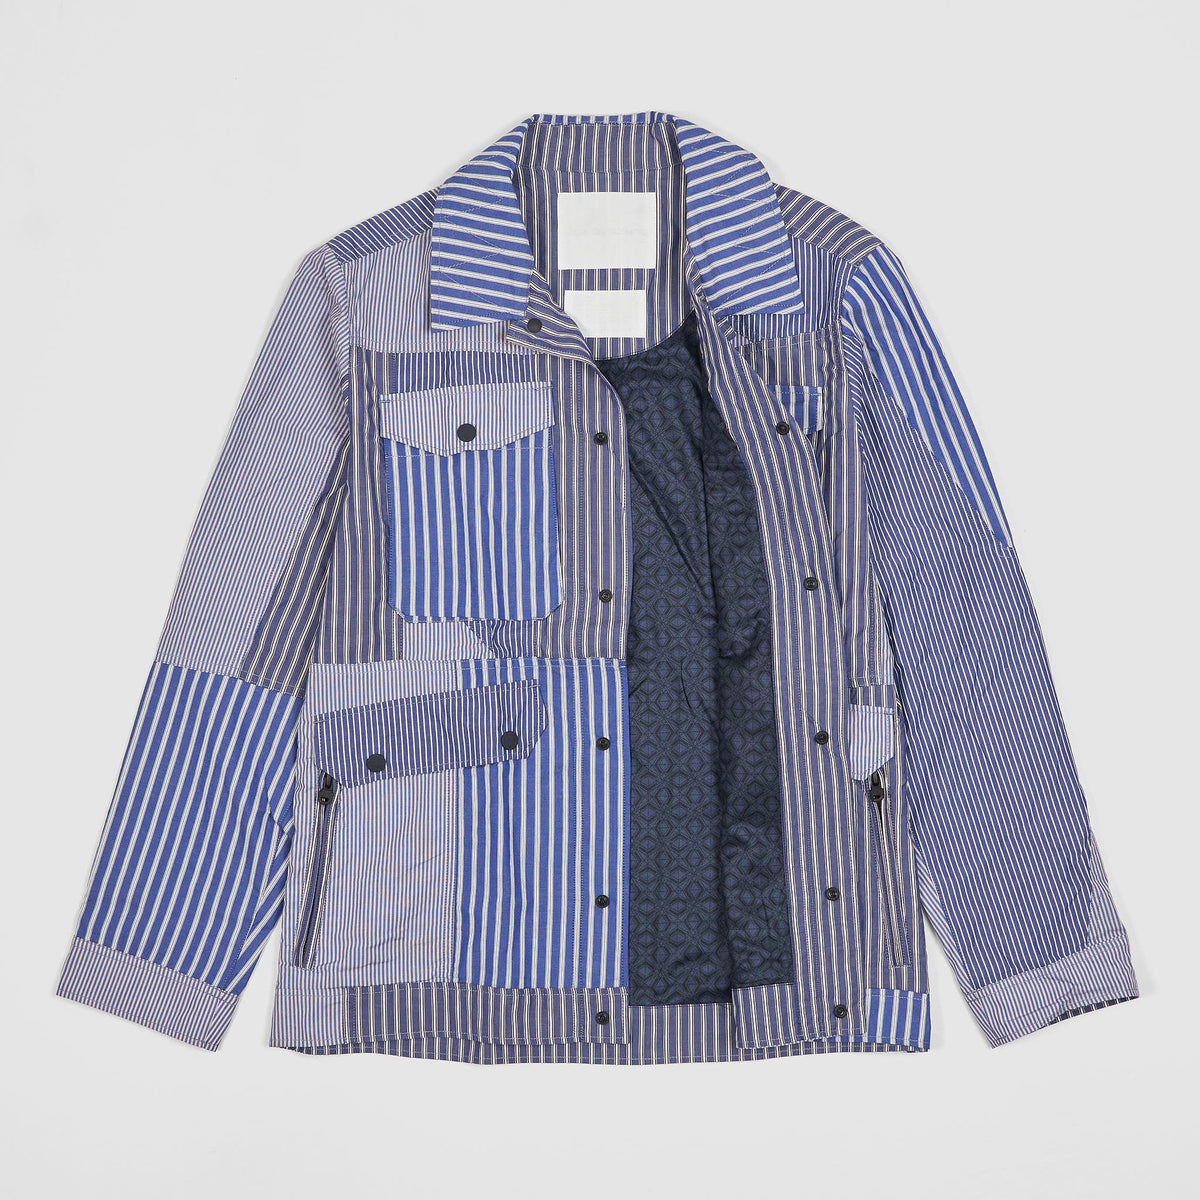 White Mountaineering Patchwork Casual Jacket